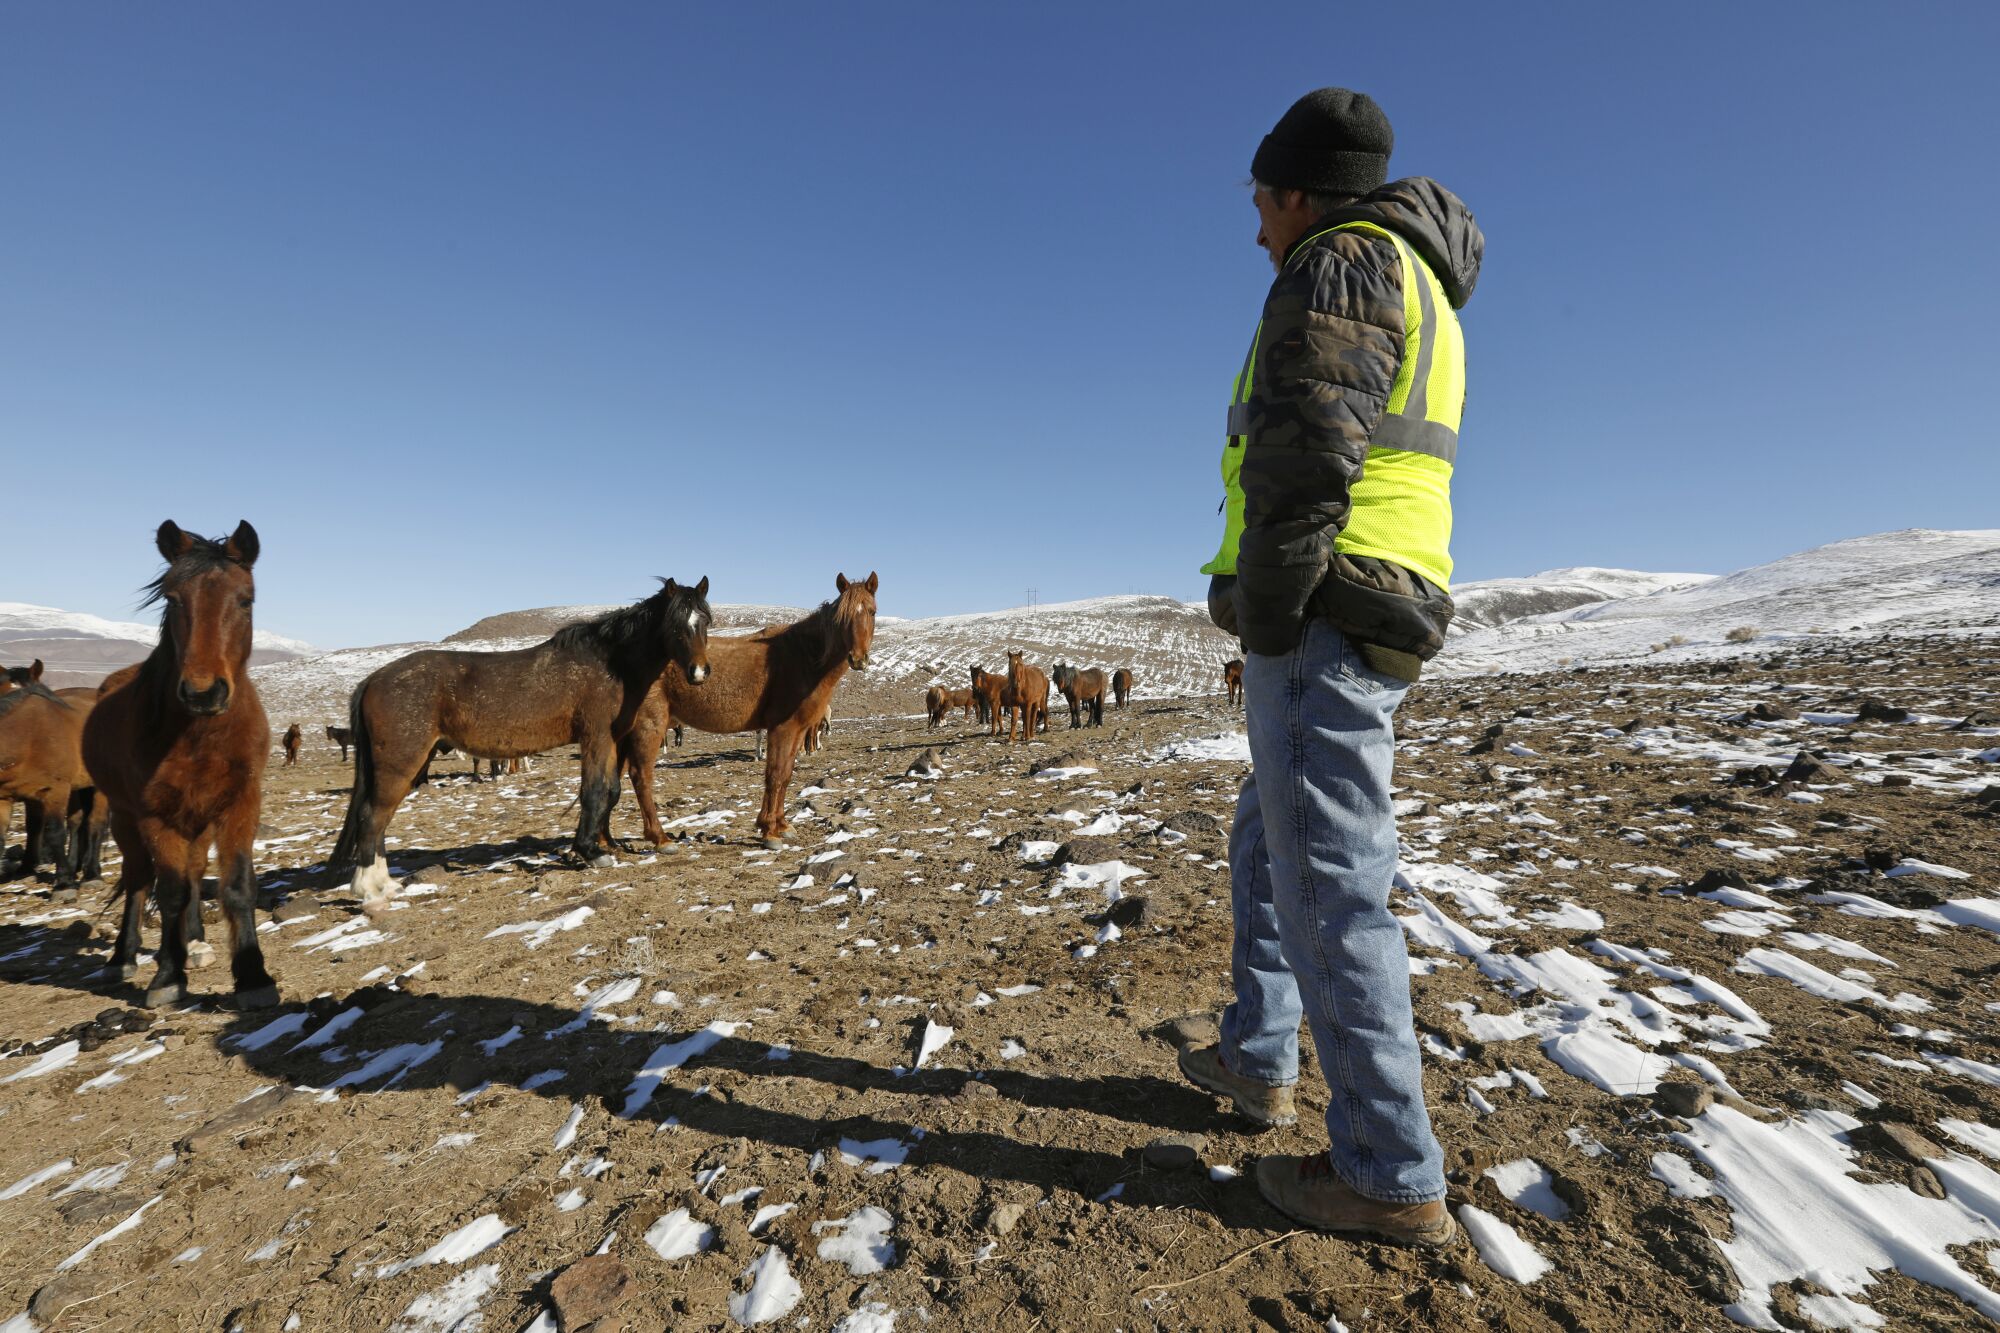 A man stands near wild horses as snow dapples the ground.